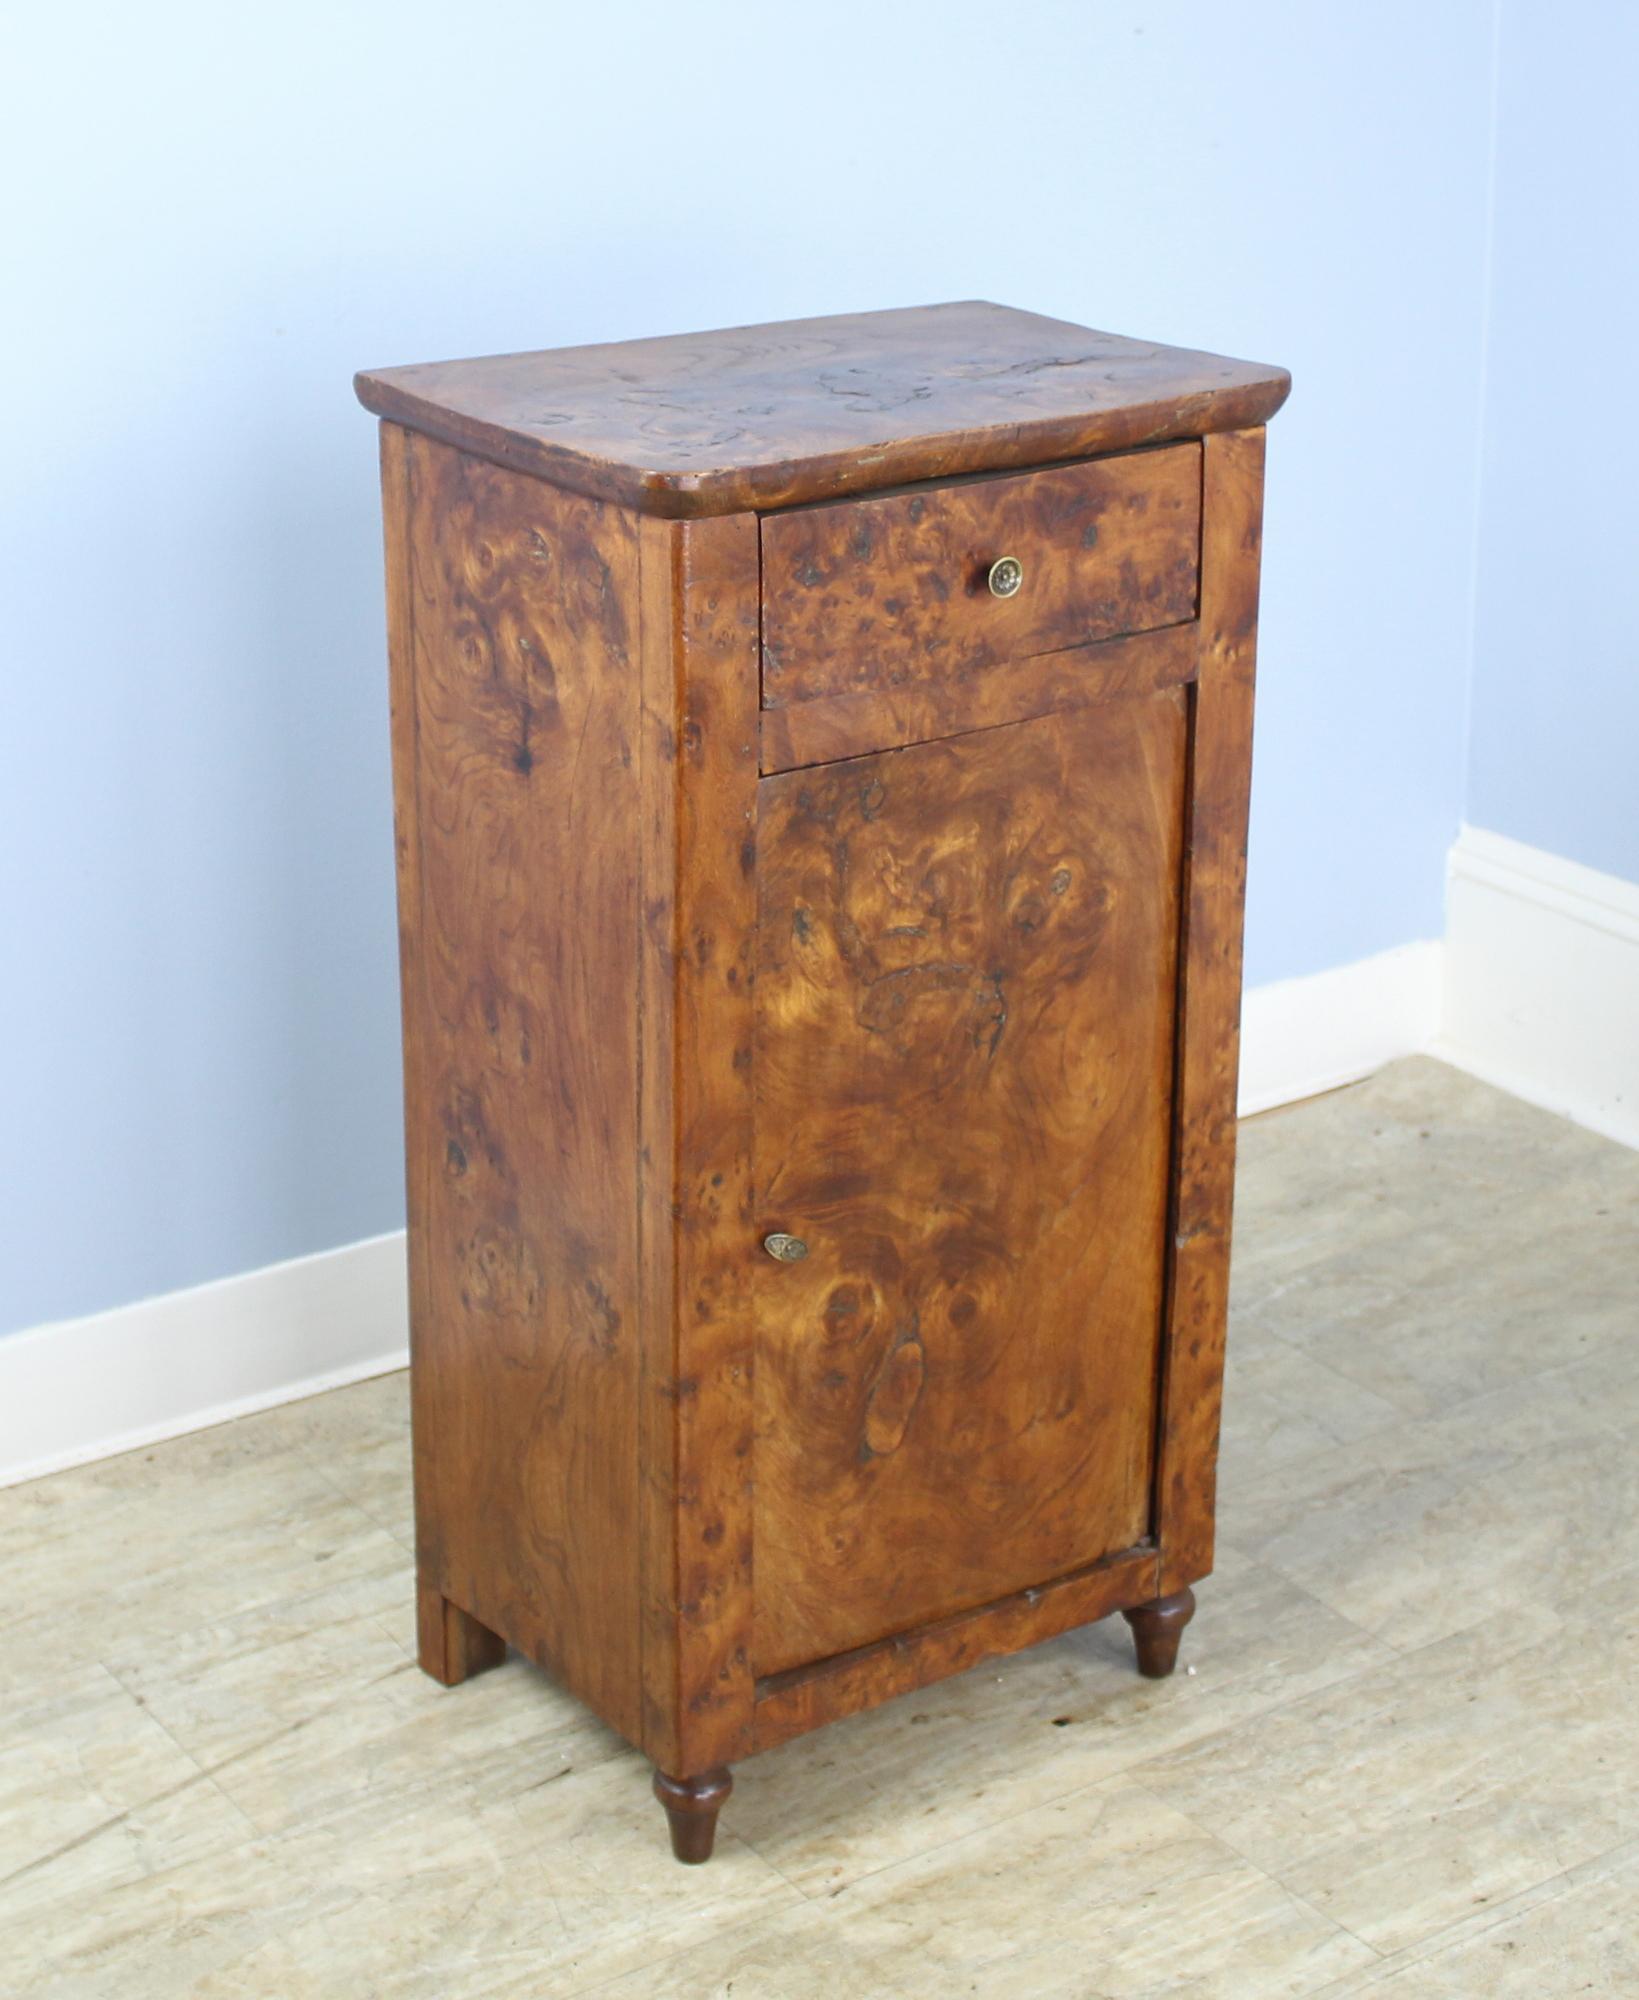 Terrific graining on this burr elm side cabinet, with a nice thick top with interesting knot holes and old repair. Sweet little drawer, and a small bronze knob. Lovely turned tear drop feet. Great storage for a practical and handsome nightstand.